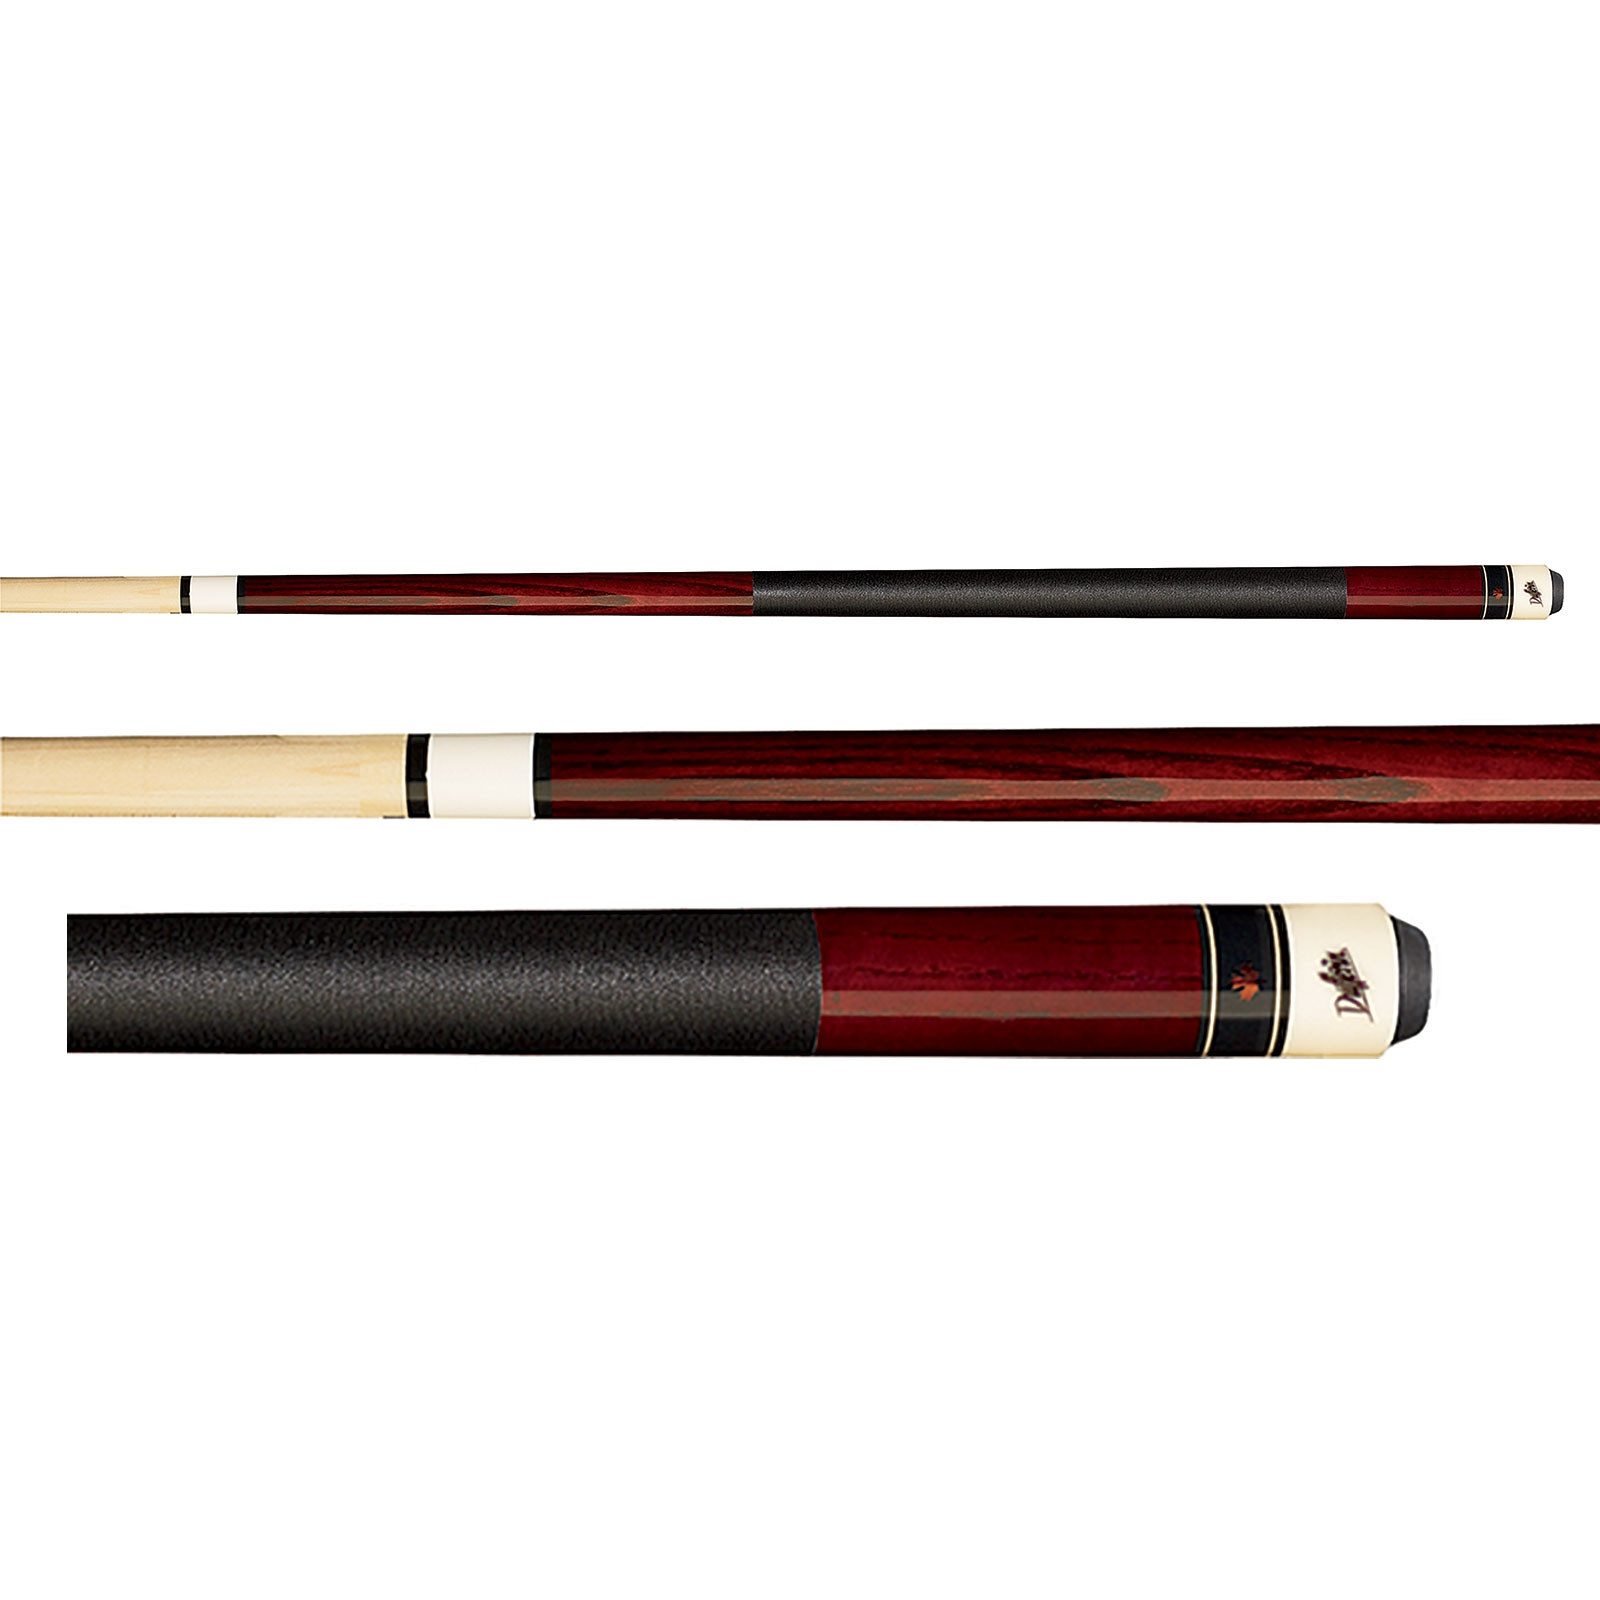 Dufferin D-236 Deep Red Stained Pool Cue Stick